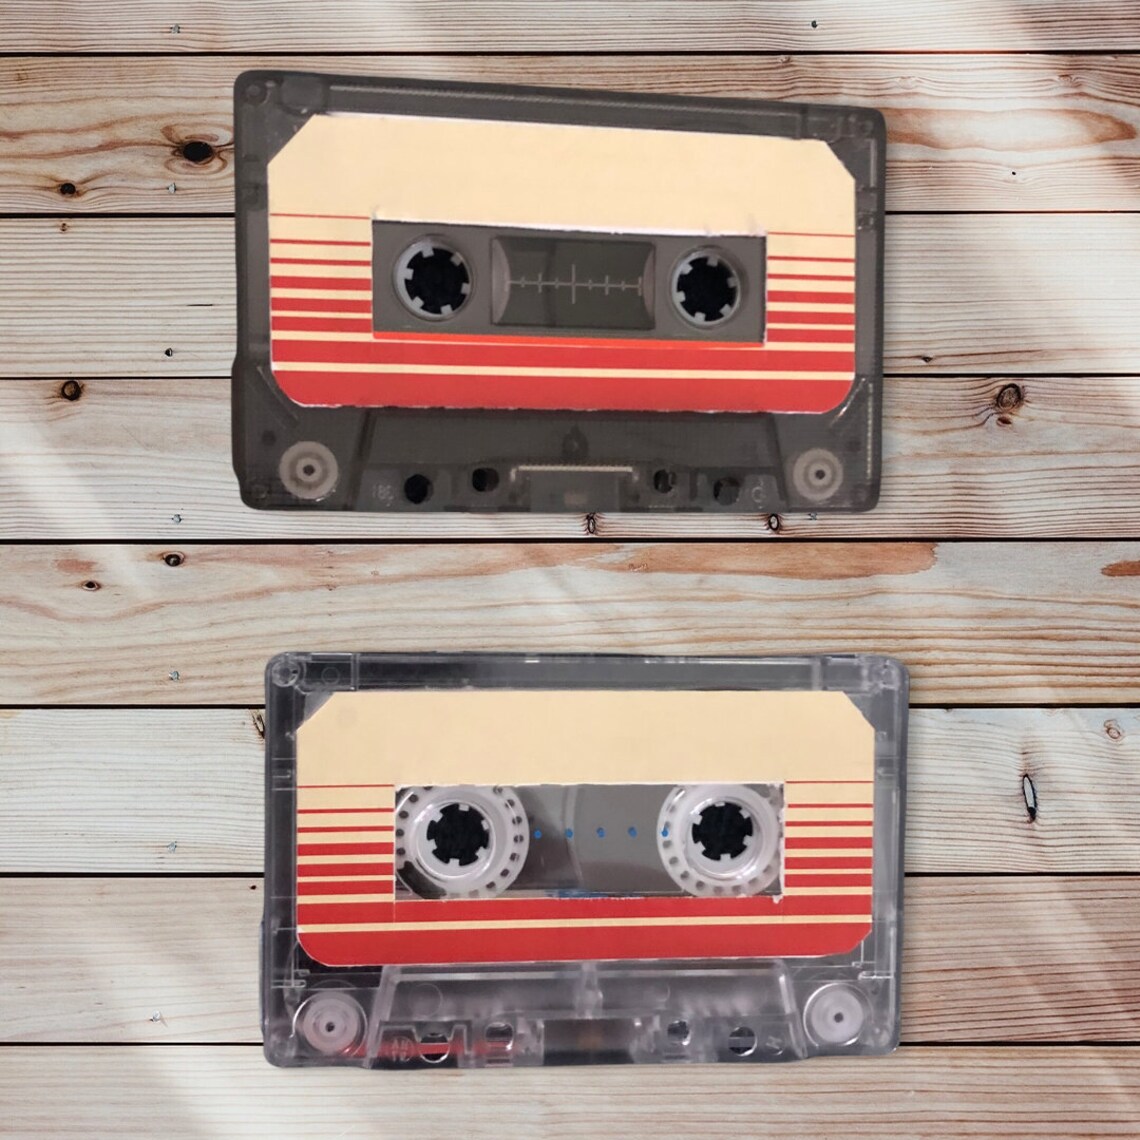 Awesome Mix Vol 2 Cassette Tape Cassette Music Etsy